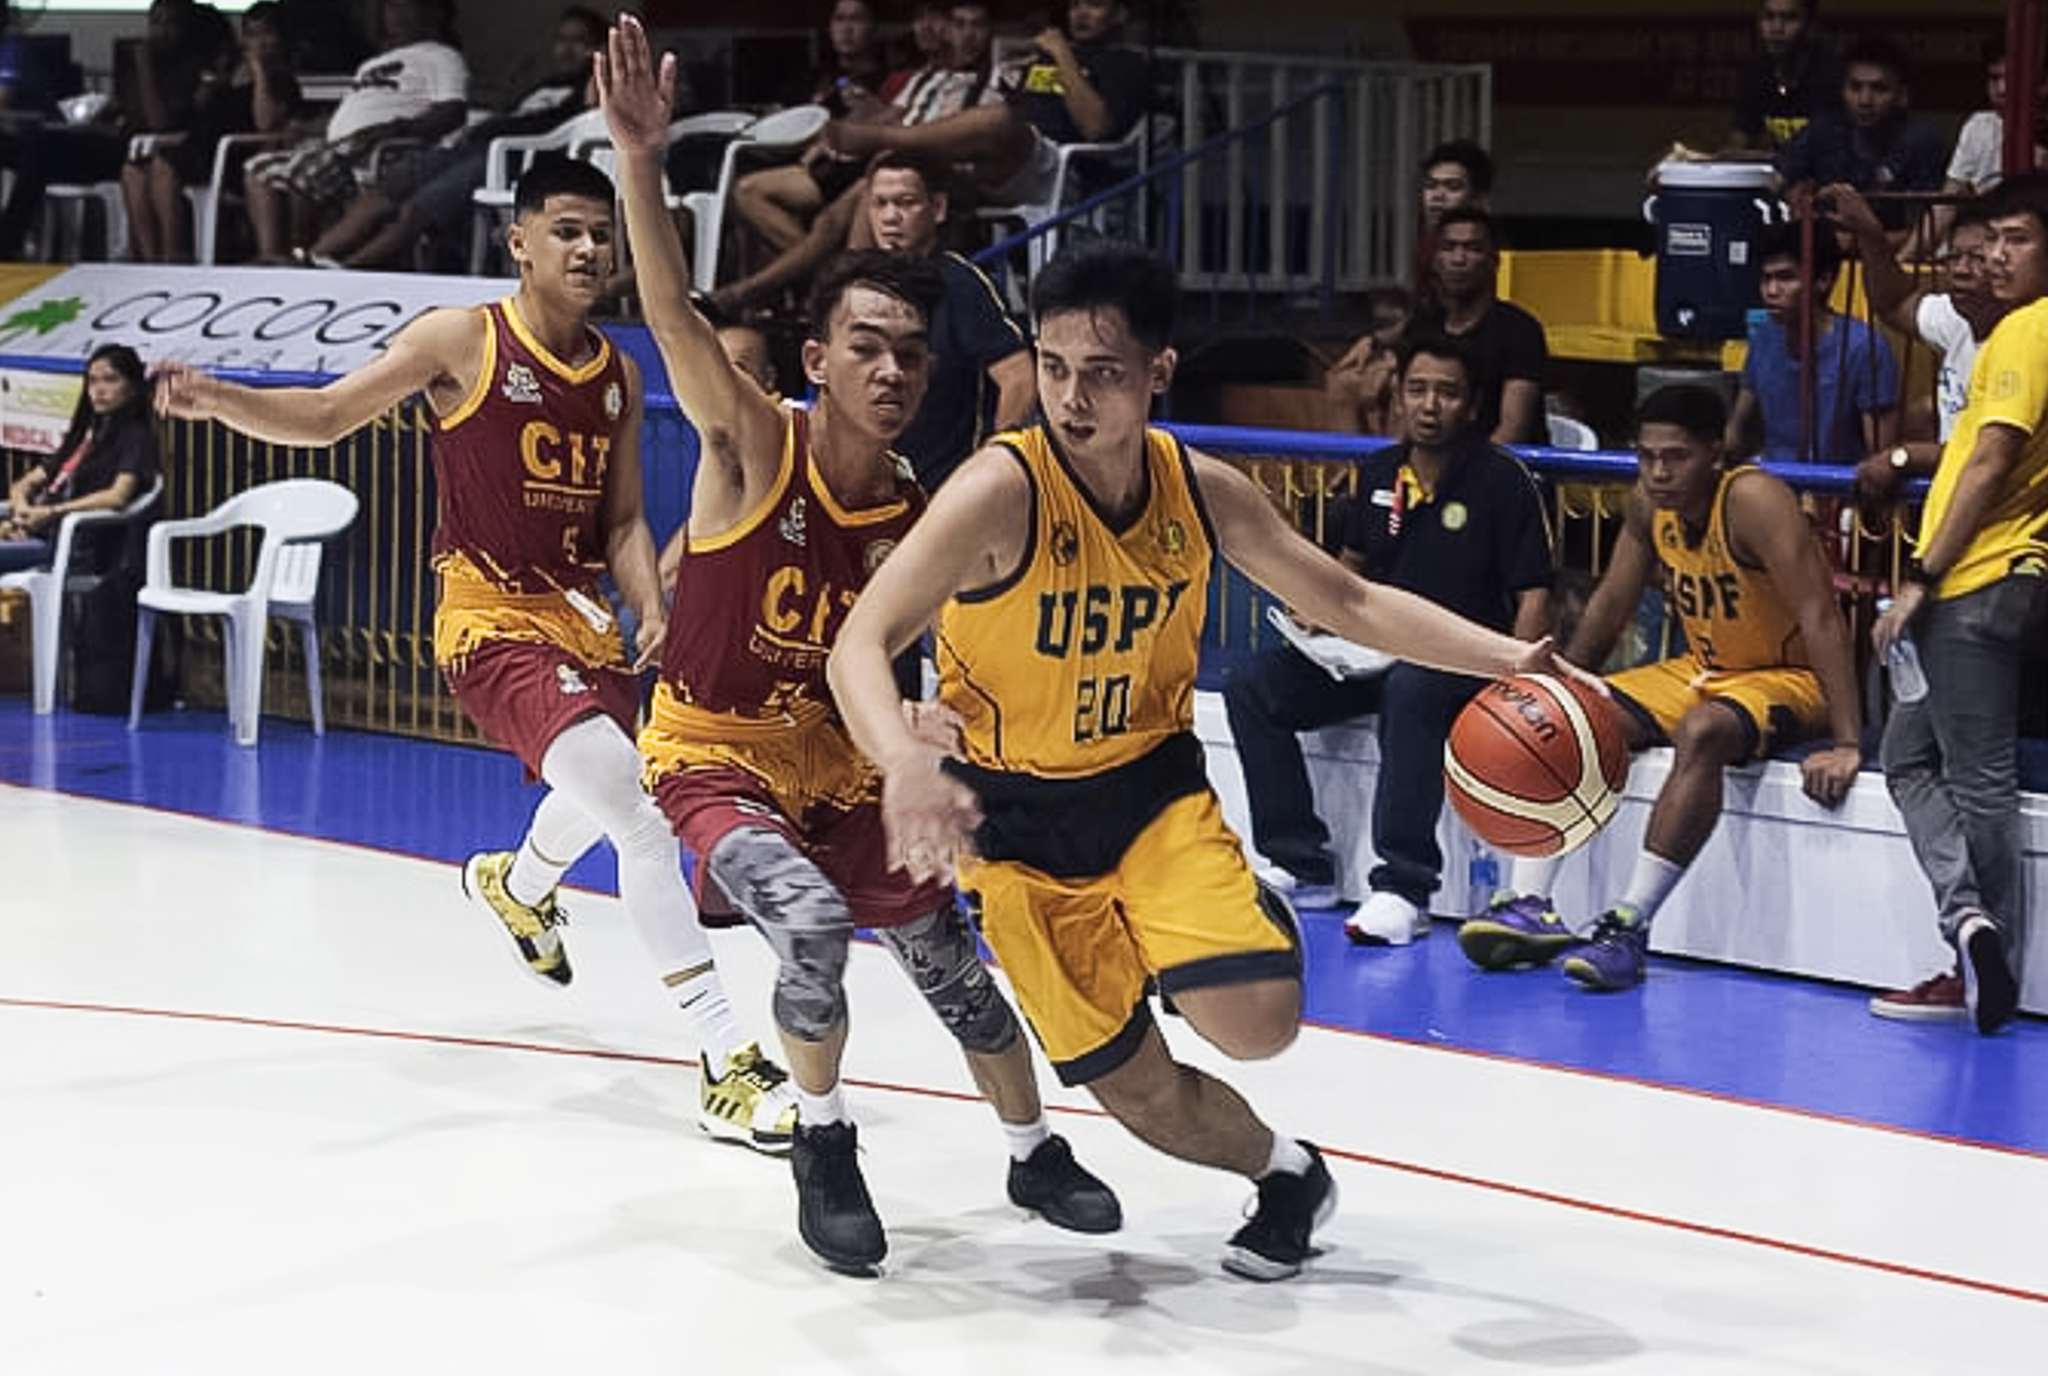 USC outlasts USPF in fight-marred game, posts 6th win